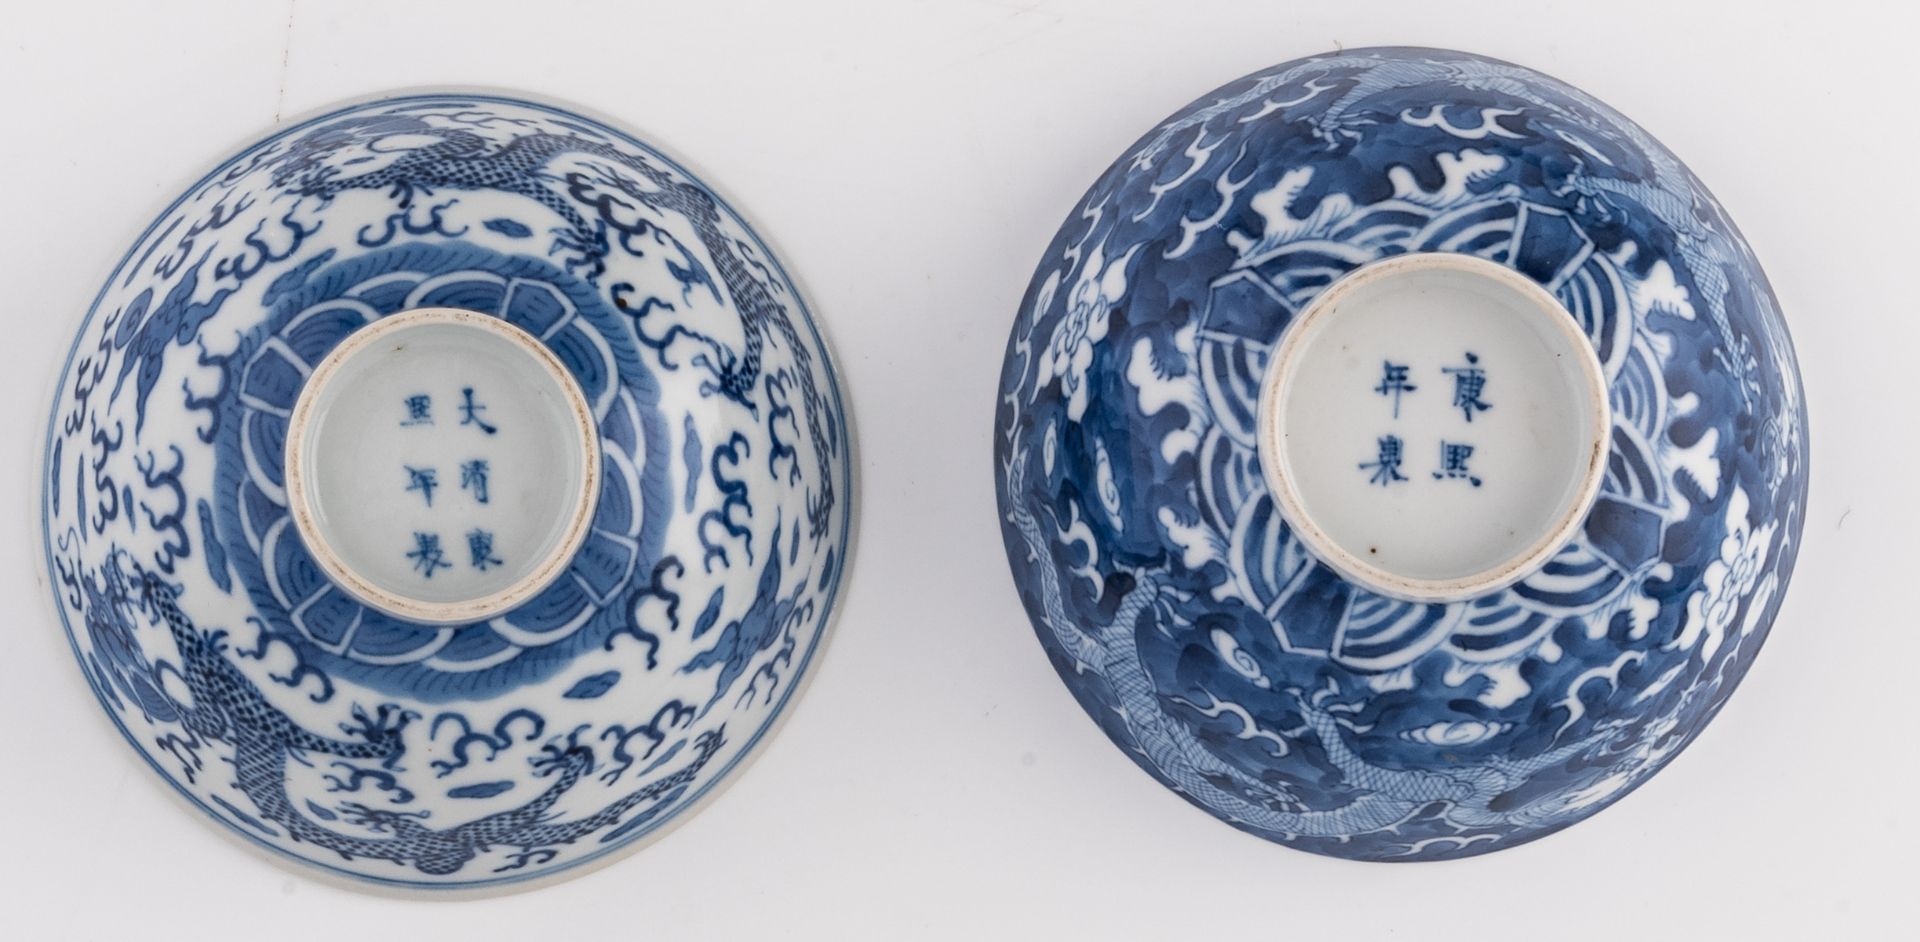 Two Chinese blue and white dragon decorated bowls, with a Kangxi mark, H 5,5 - 6 - ø 12,5 - 13 cm - Image 7 of 7